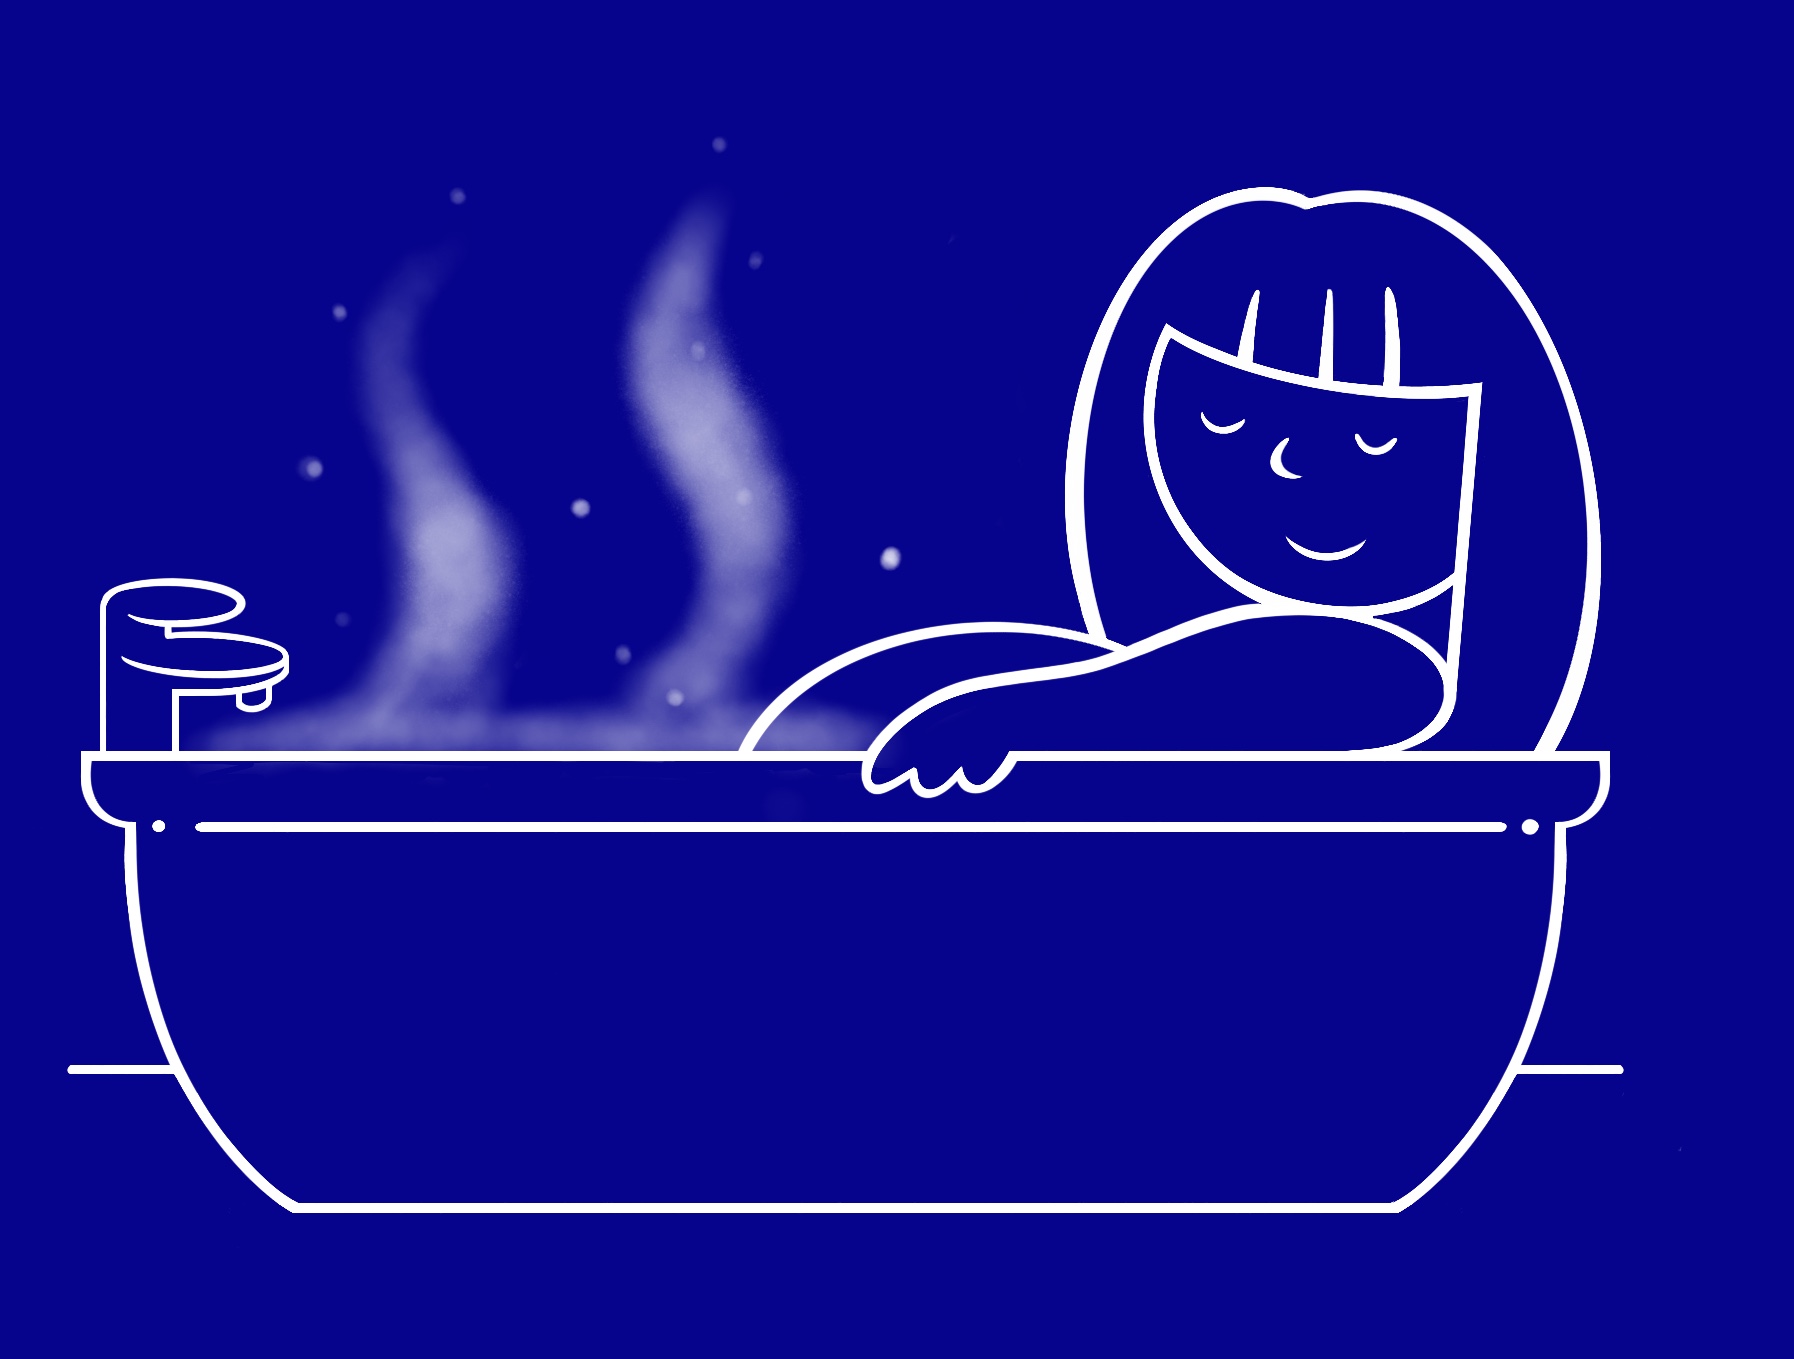 Steam it out in a relaxing bath